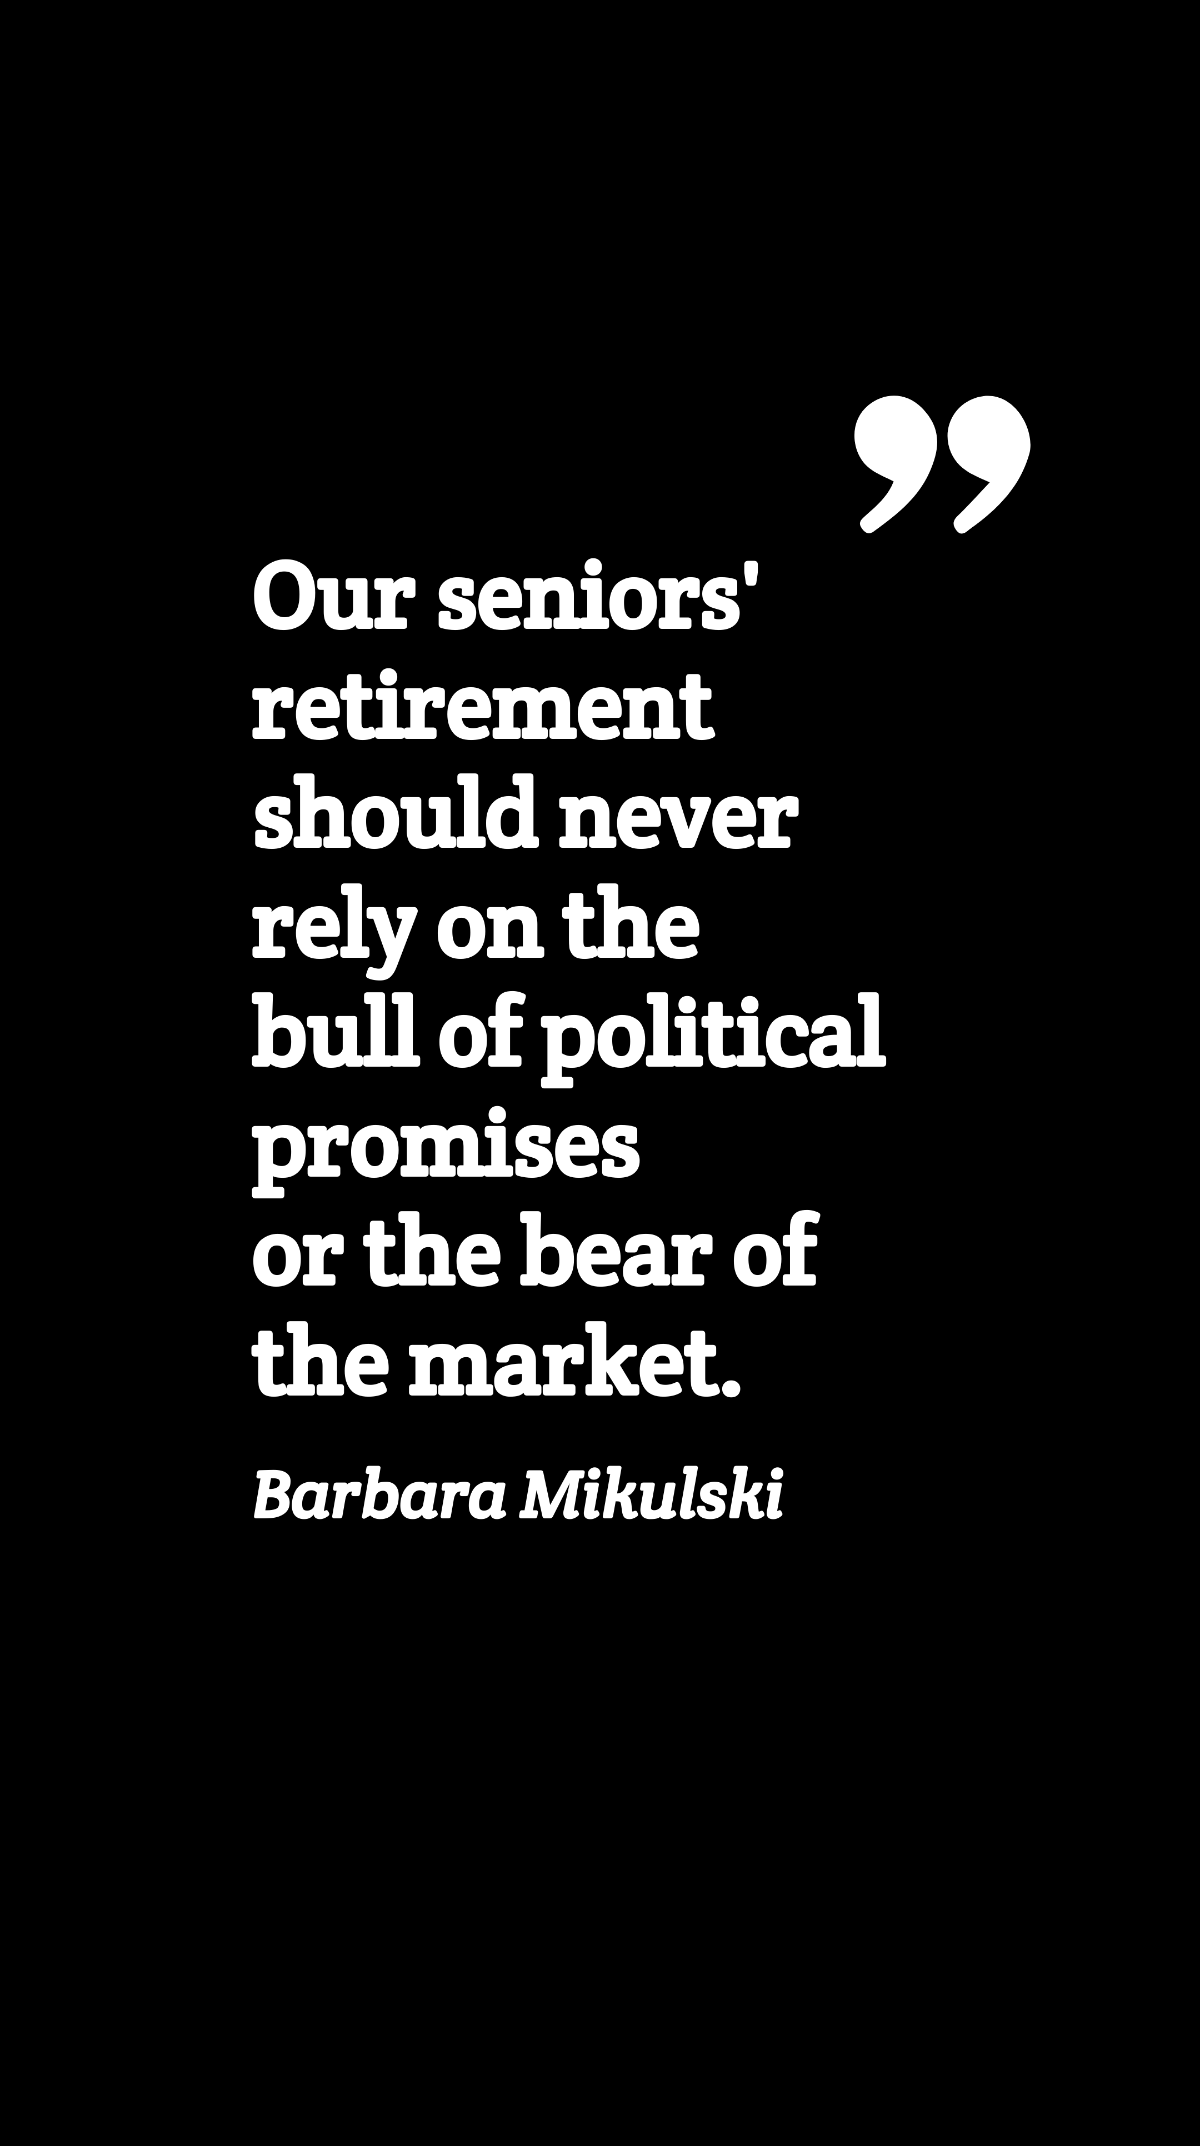 Barbara Mikulski - Our seniors' retirement should never rely on the bull of political promises or the bear of the market. Template